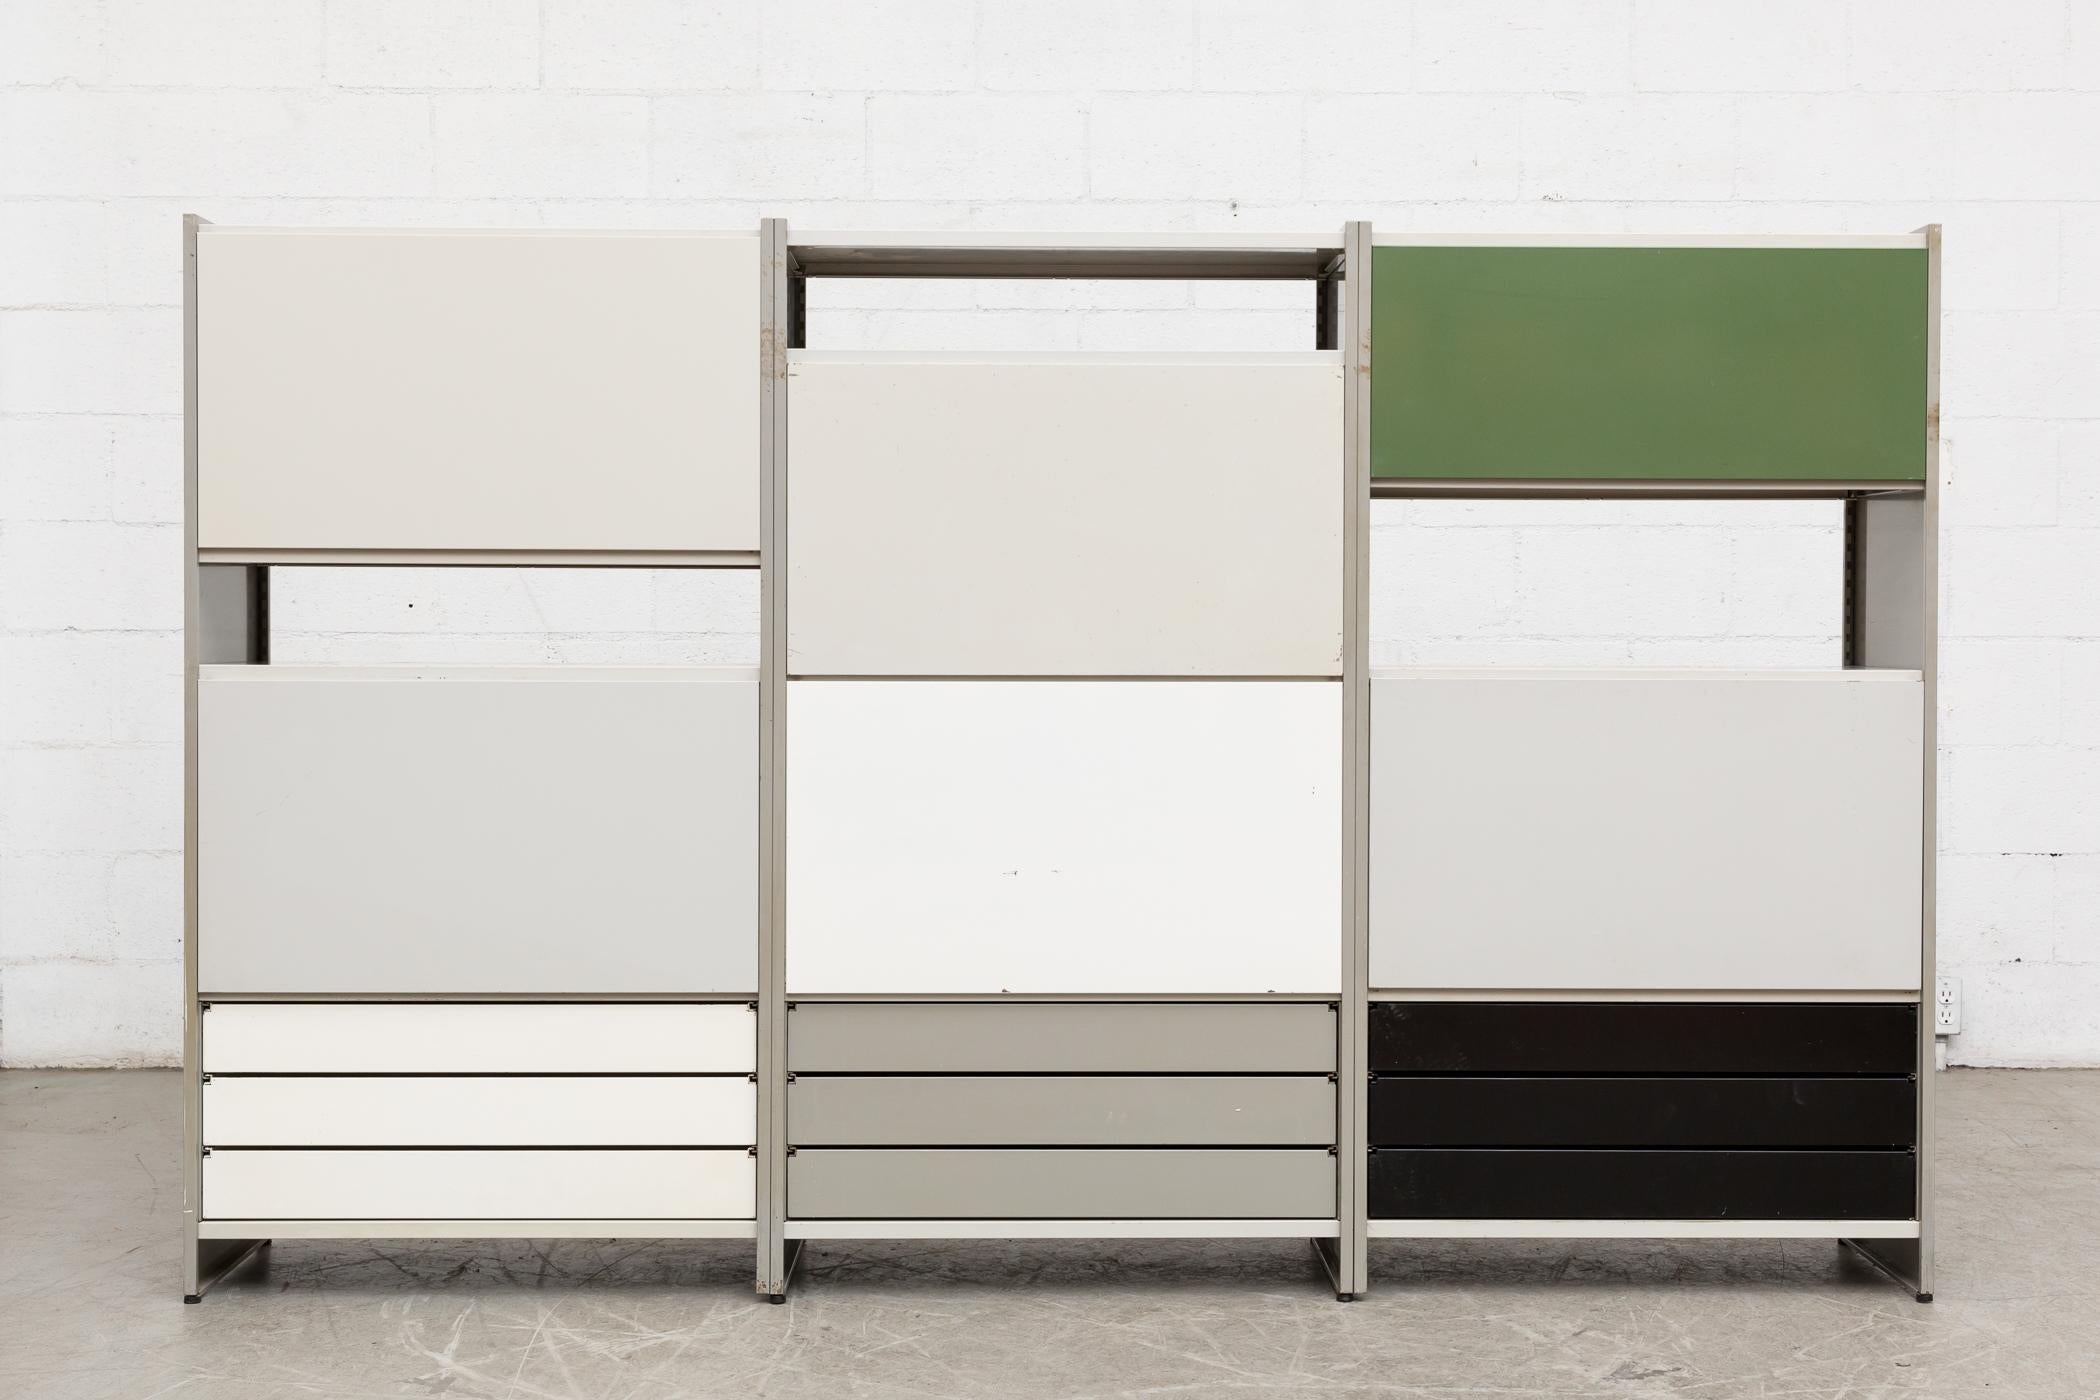 Large Gispen 5600 industrial shelving unit by A.R. Cordemeyer. Grey enameled metal three-section industrial bookshelf and storage unit with drop down desk and double purple metal drawers, a green back panel; two cabinets with enameled metal sliding